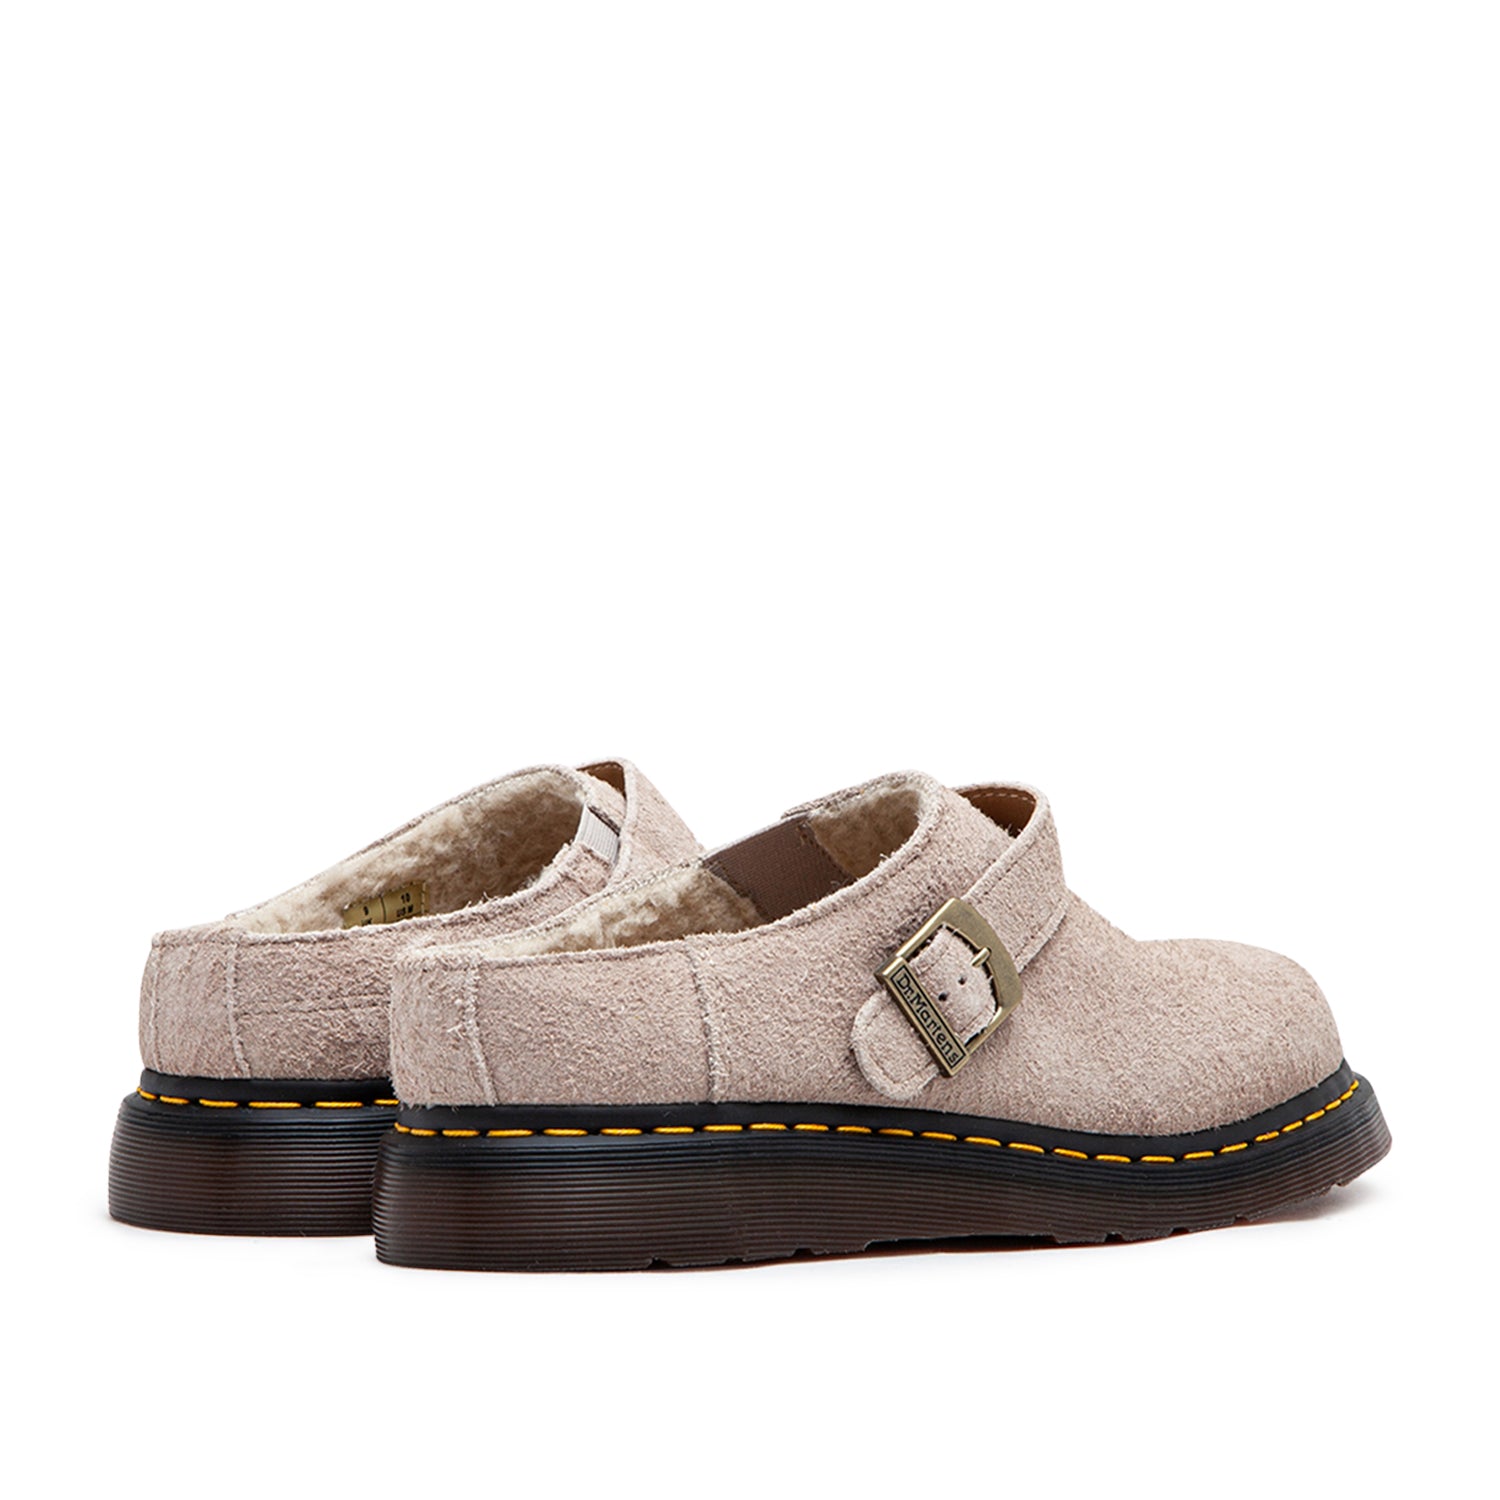 Dr. Martens Isham Faux Shearling Lined Suede Mules (Beige)  - Allike Store